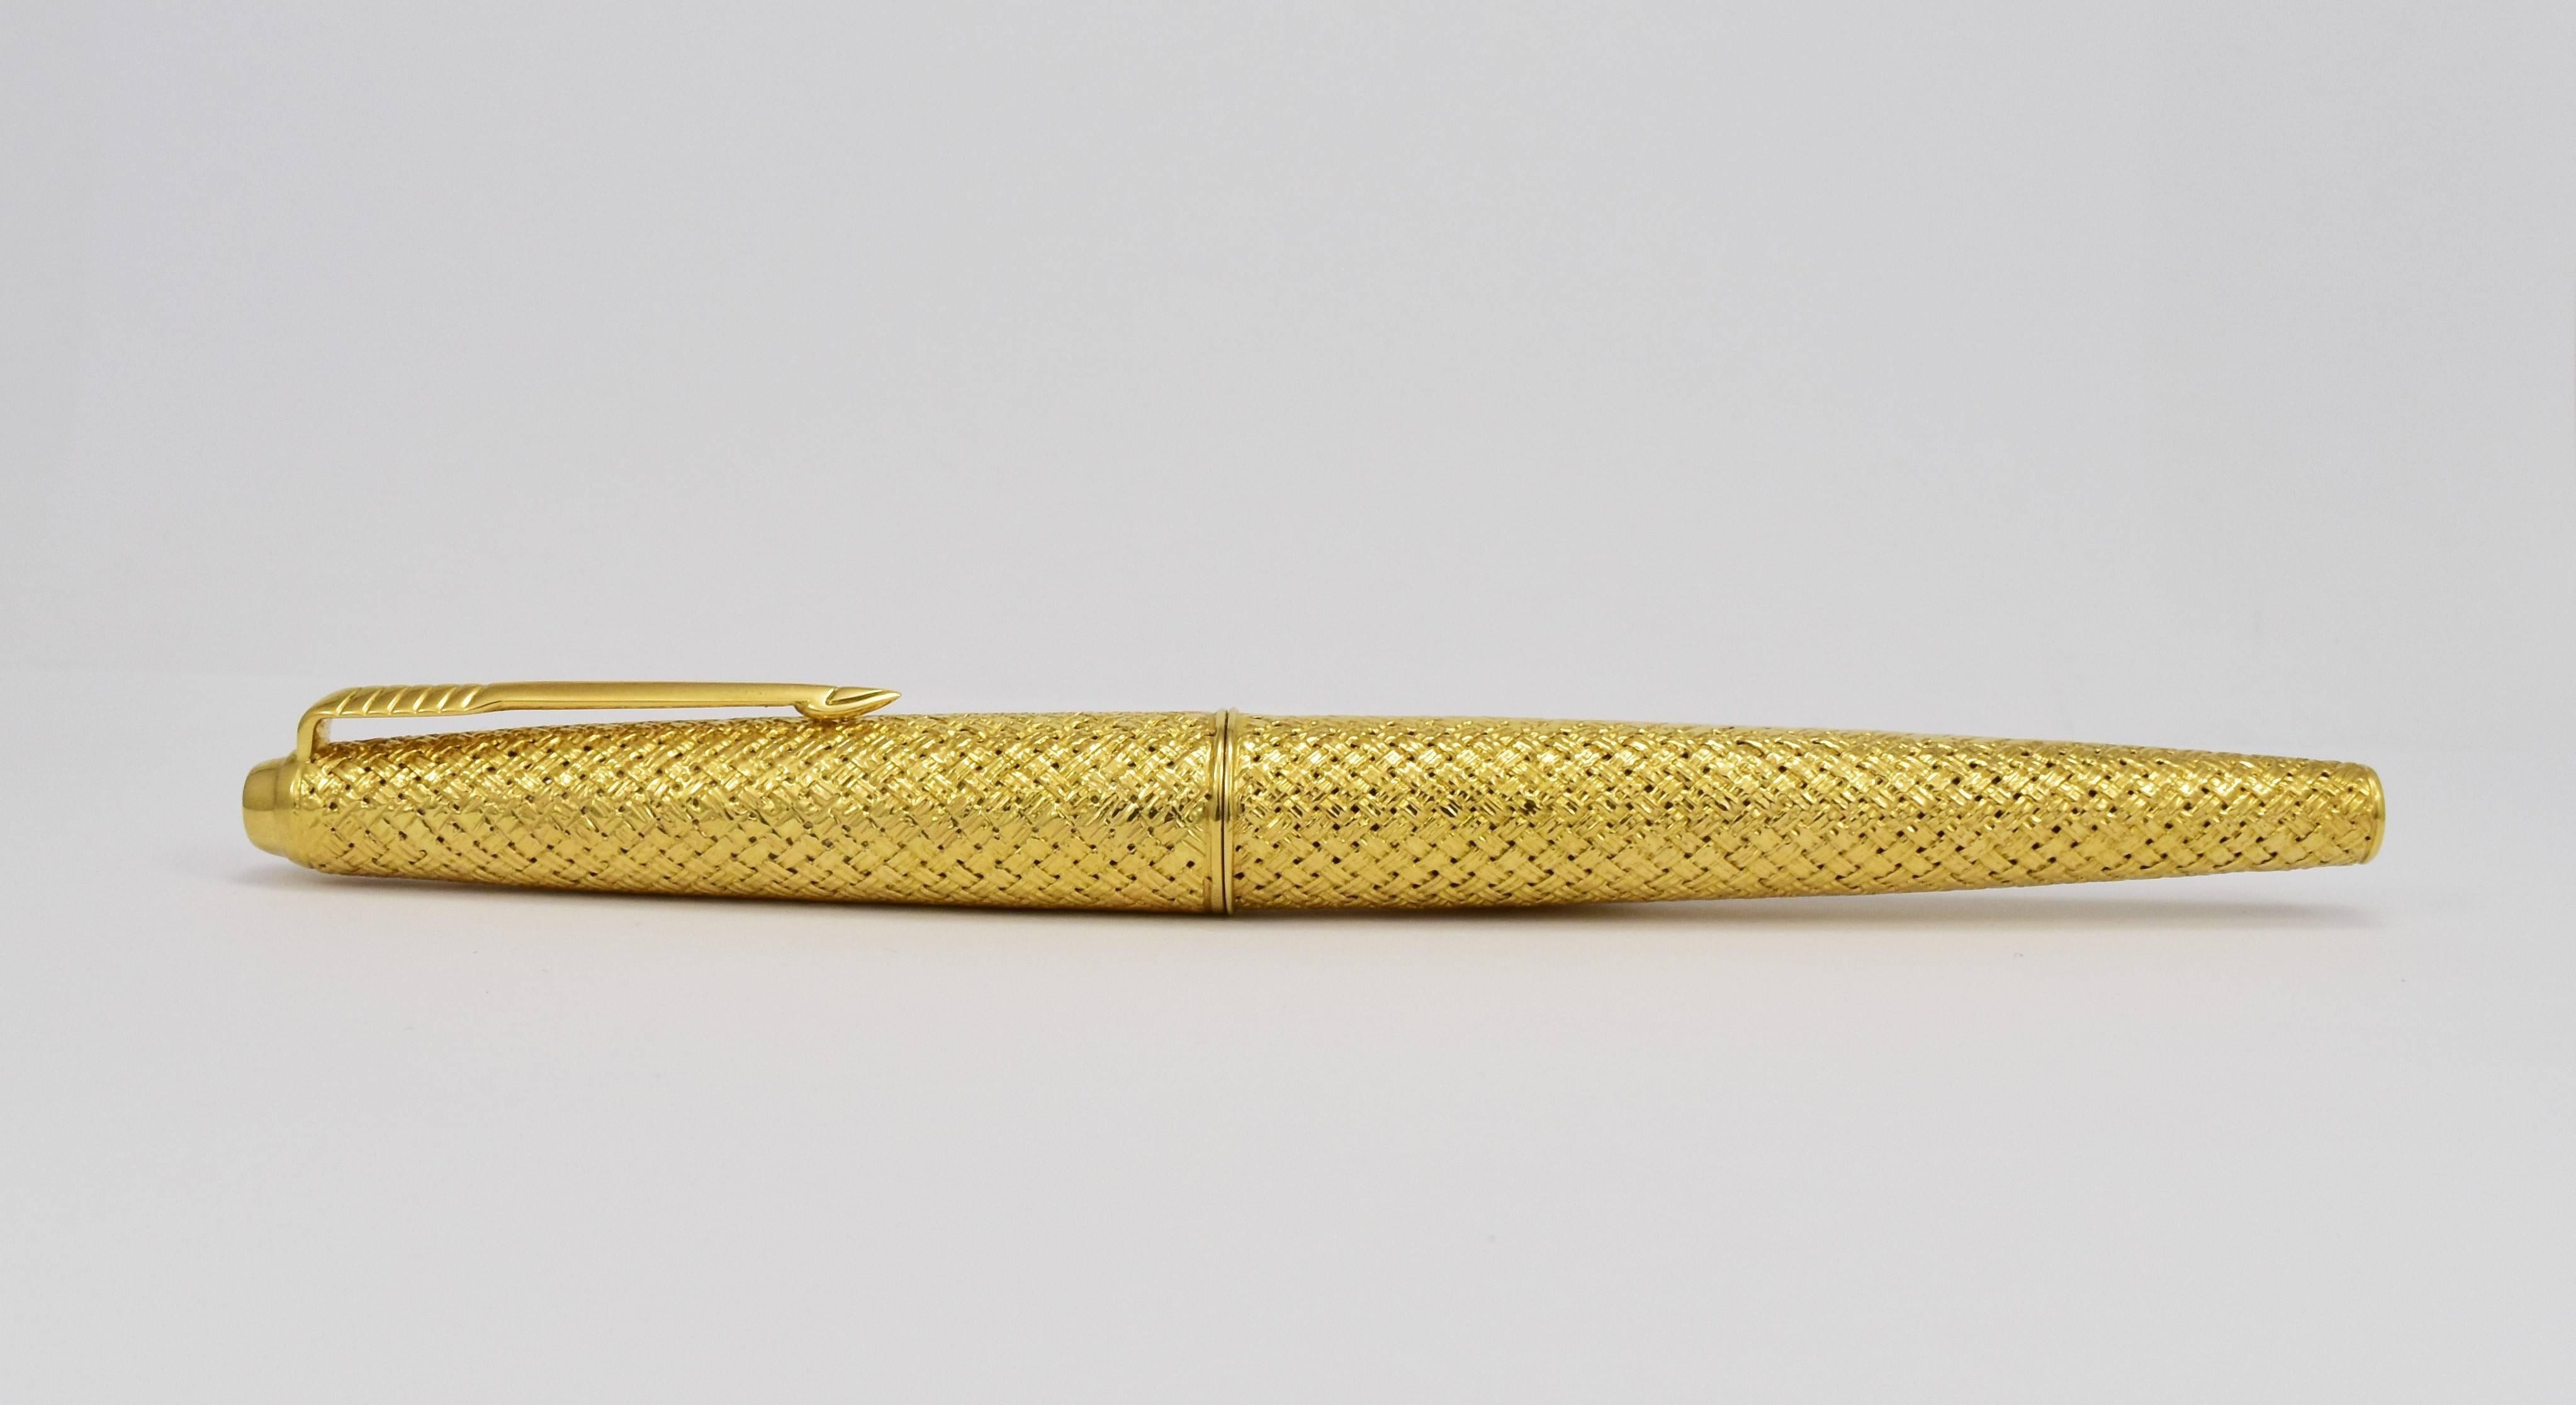 Elegant Parker fountain pen in cased in (tested as) 18-karat white and yellow gold. It features an intricate basketweave design. Beautiful workmanship and easy to use, carry, or give as a gift. No UK hallmark as originated abroad, however tested as